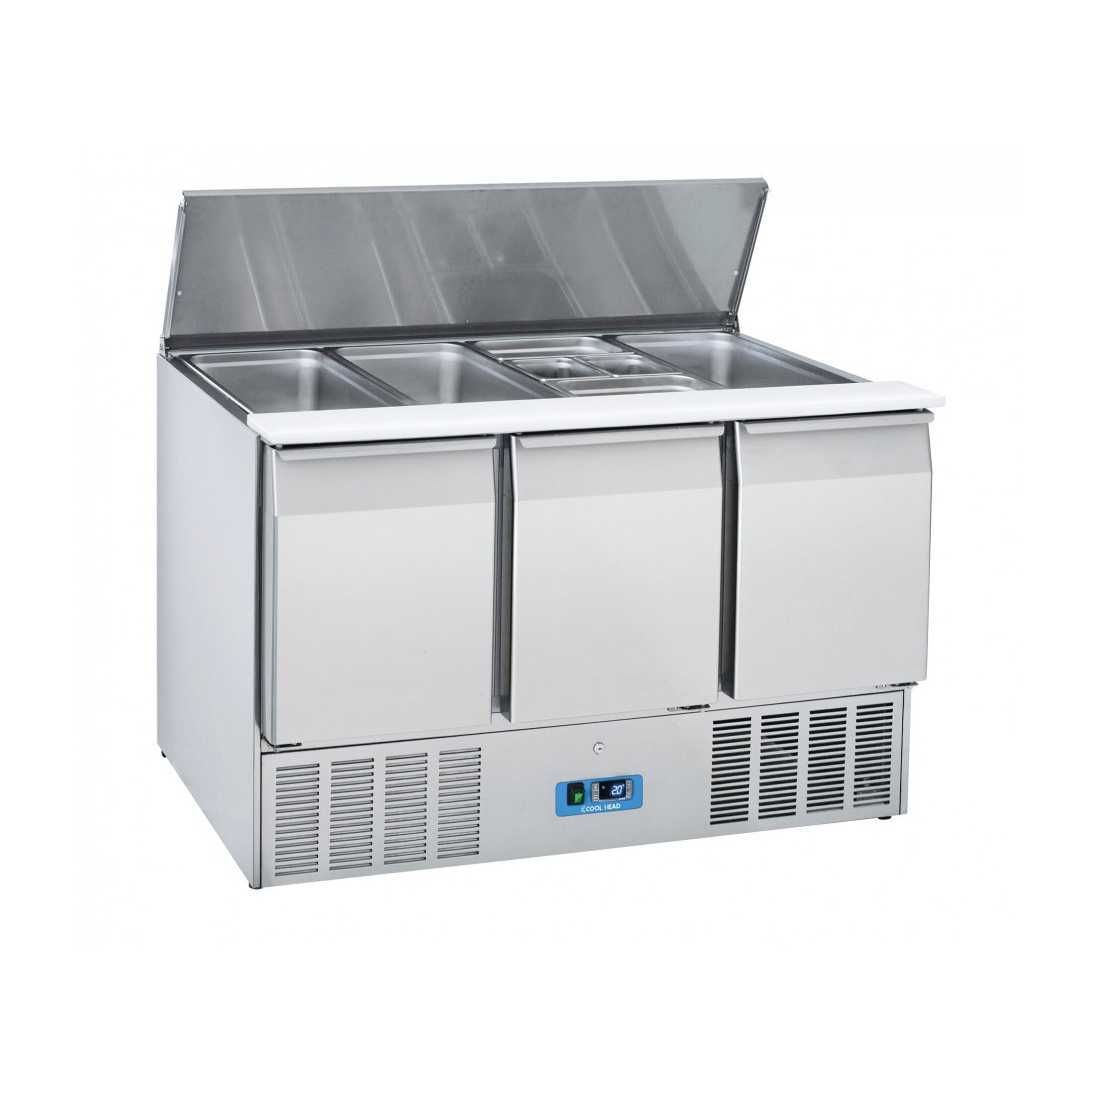 COOL HEAD ,CR93, Sandwich and Salad Prep Refrigerator with Three Doors and Sliding Top Cover|mkayn|مكاين